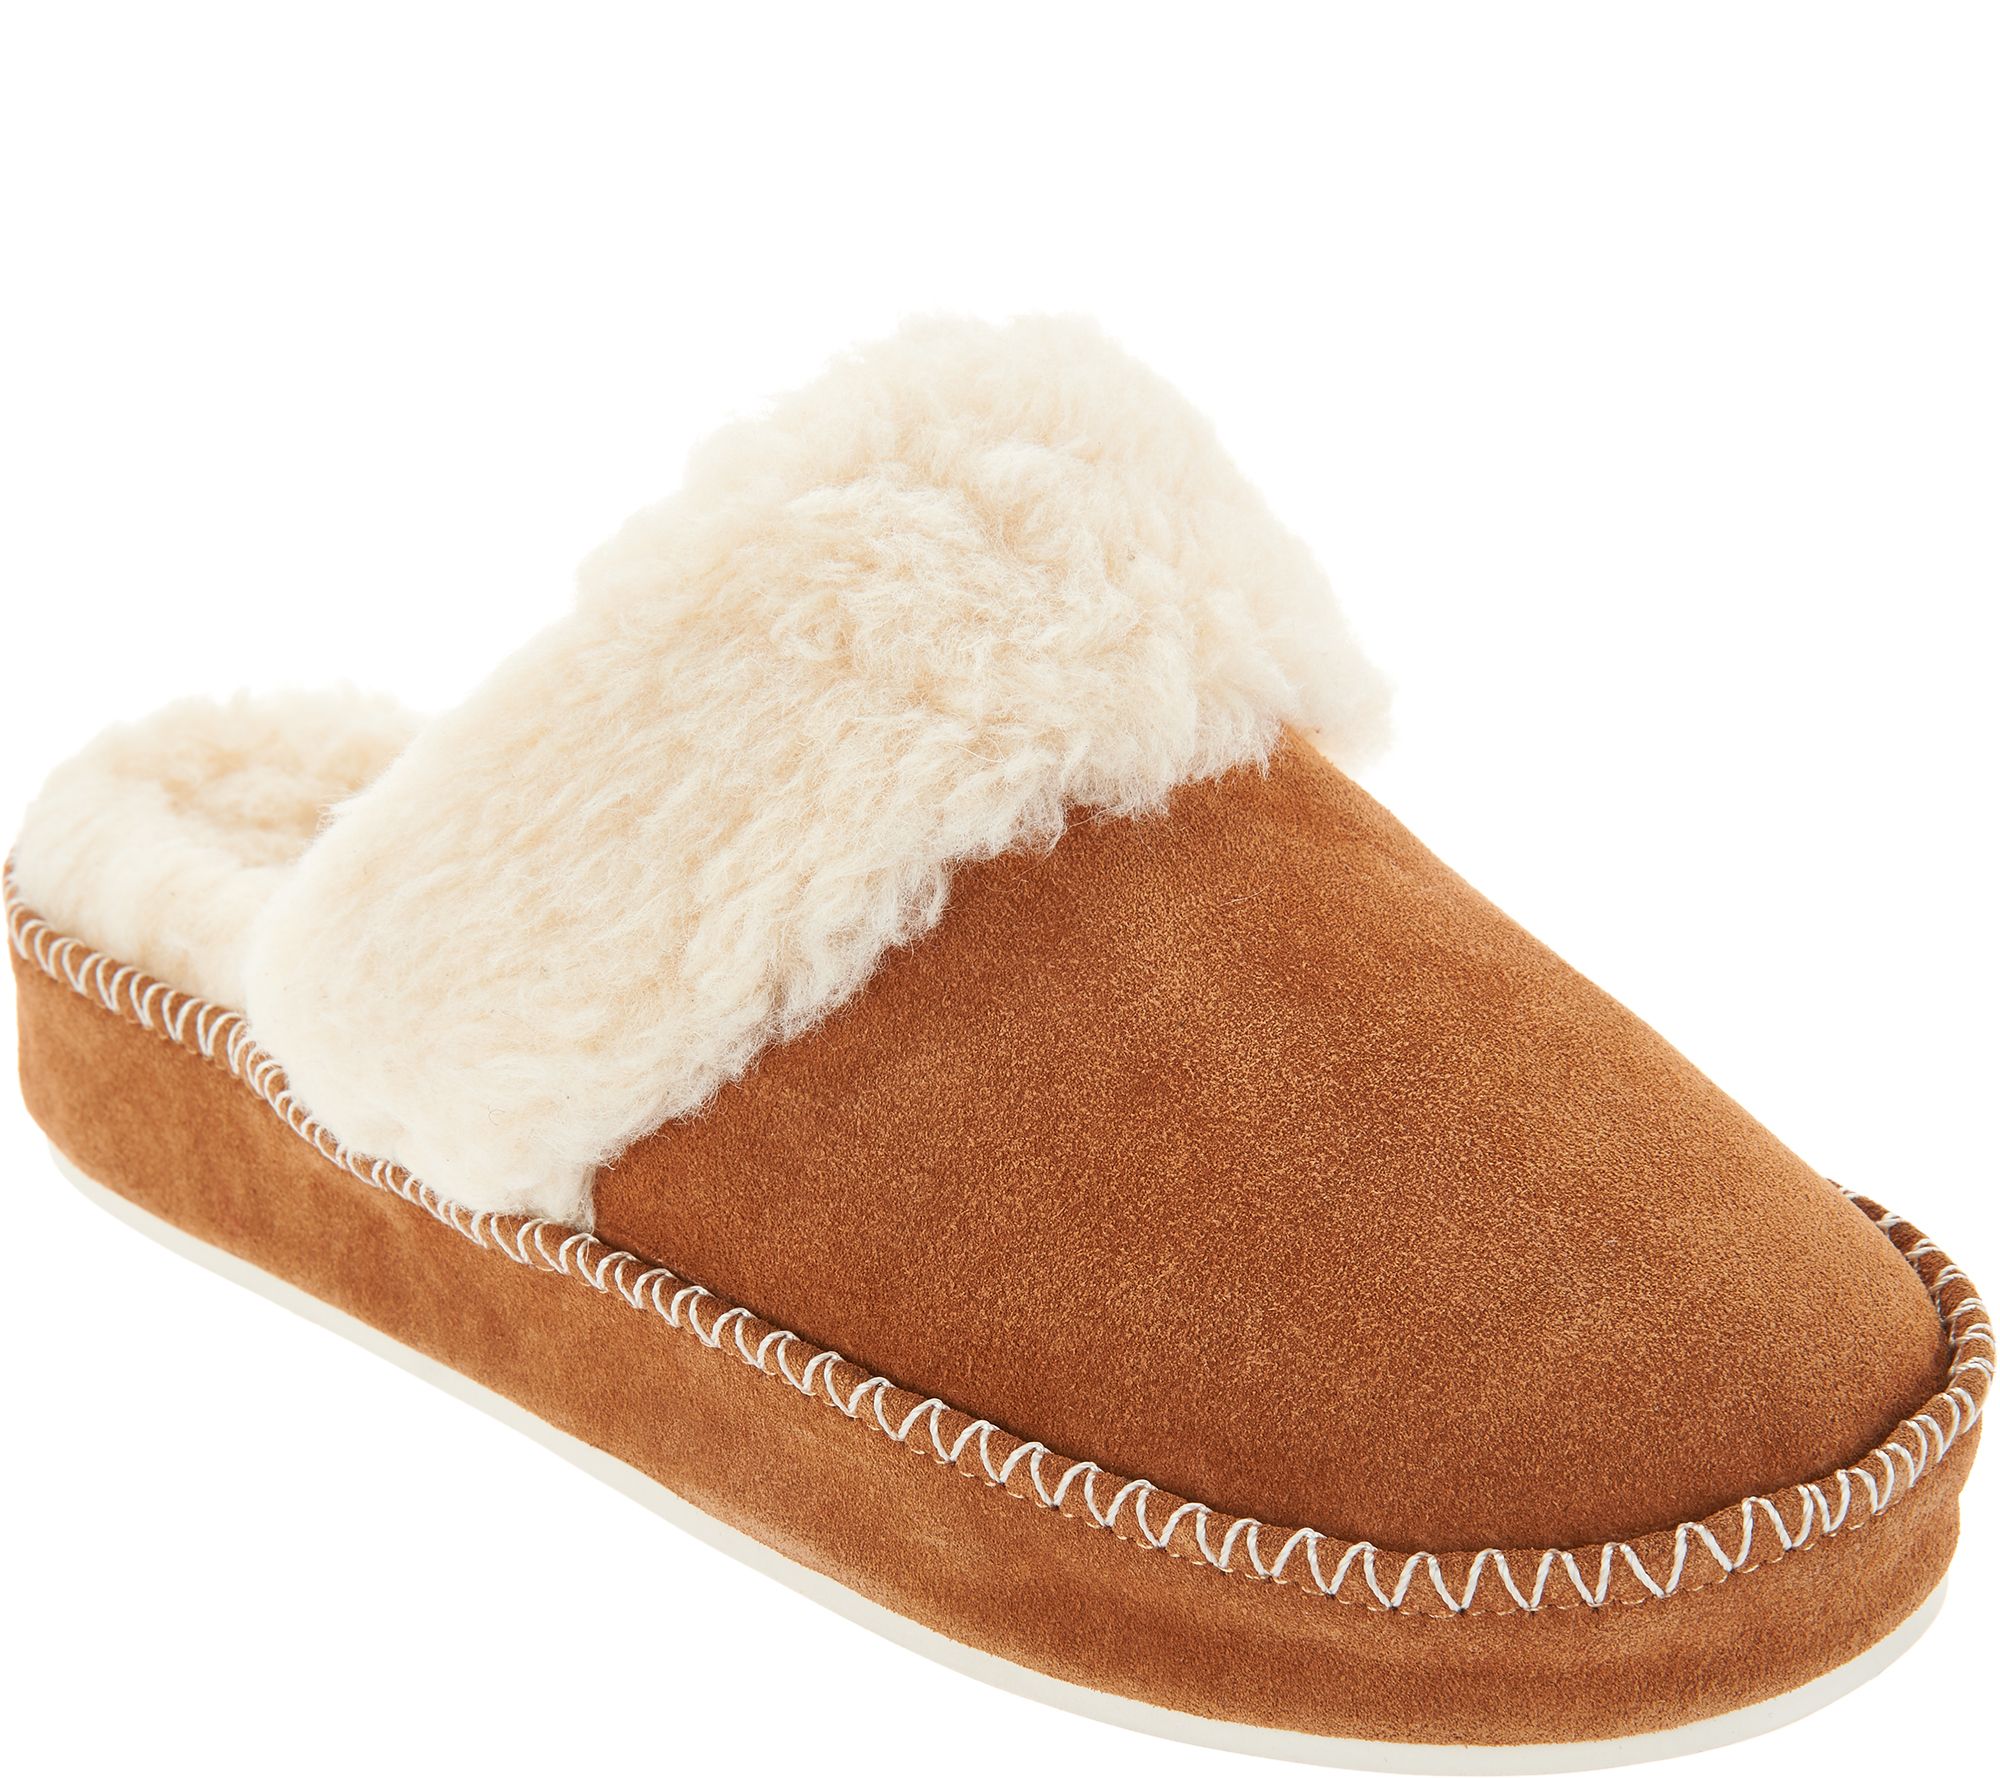 Vionic Suede Slippers - Marley - Page 1 — QVC.com